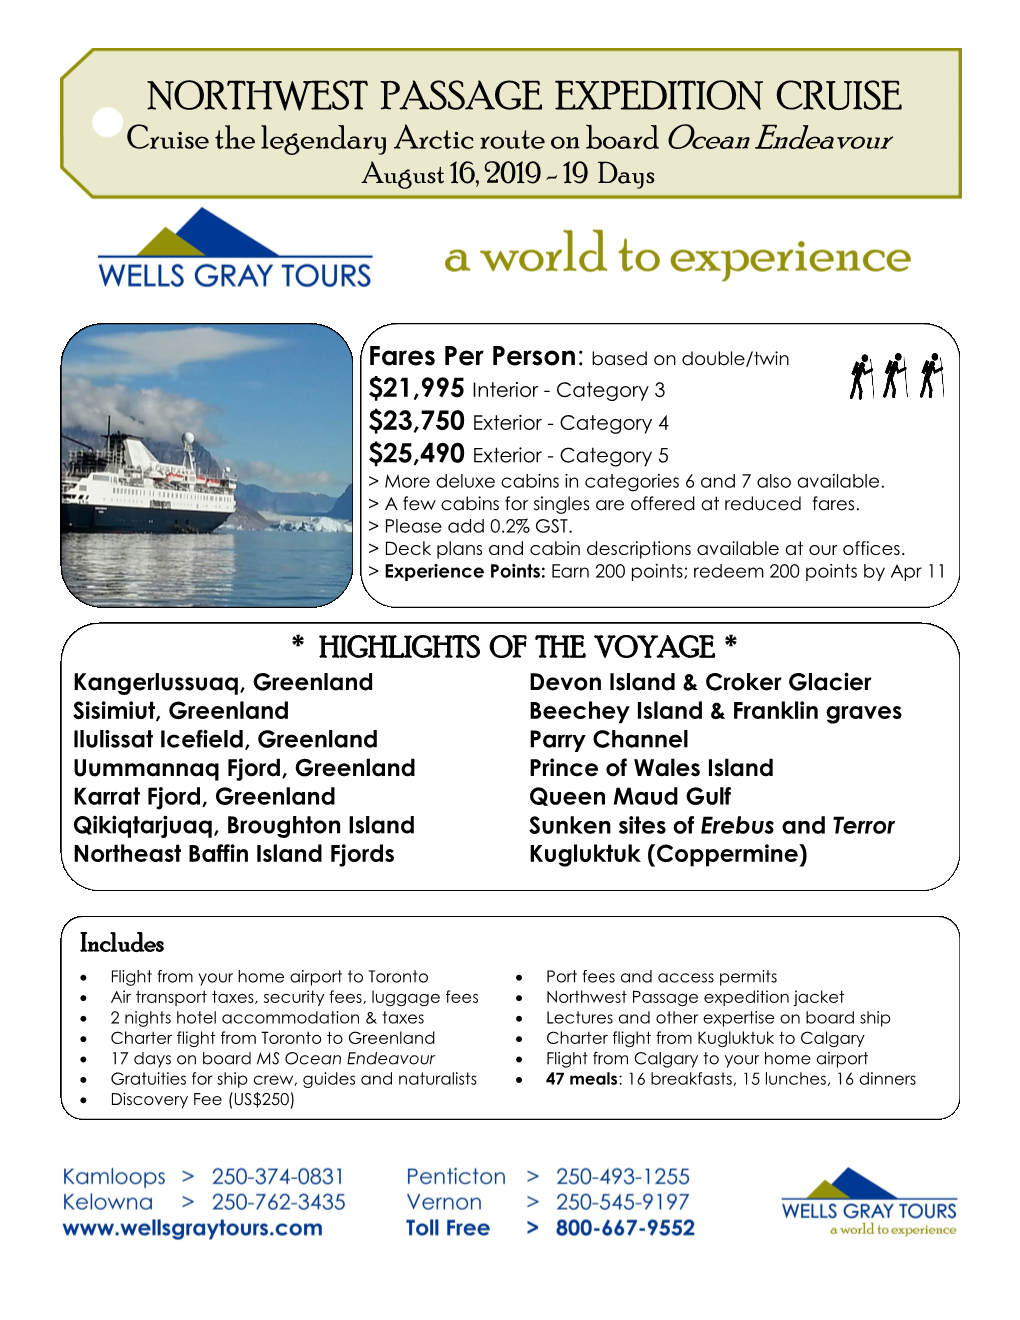 NORTHWEST PASSAGE EXPEDITION CRUISE Cruise the Legendary Arctic Route on Board Ocean Endeavour August 16, 2019 - 19 Days